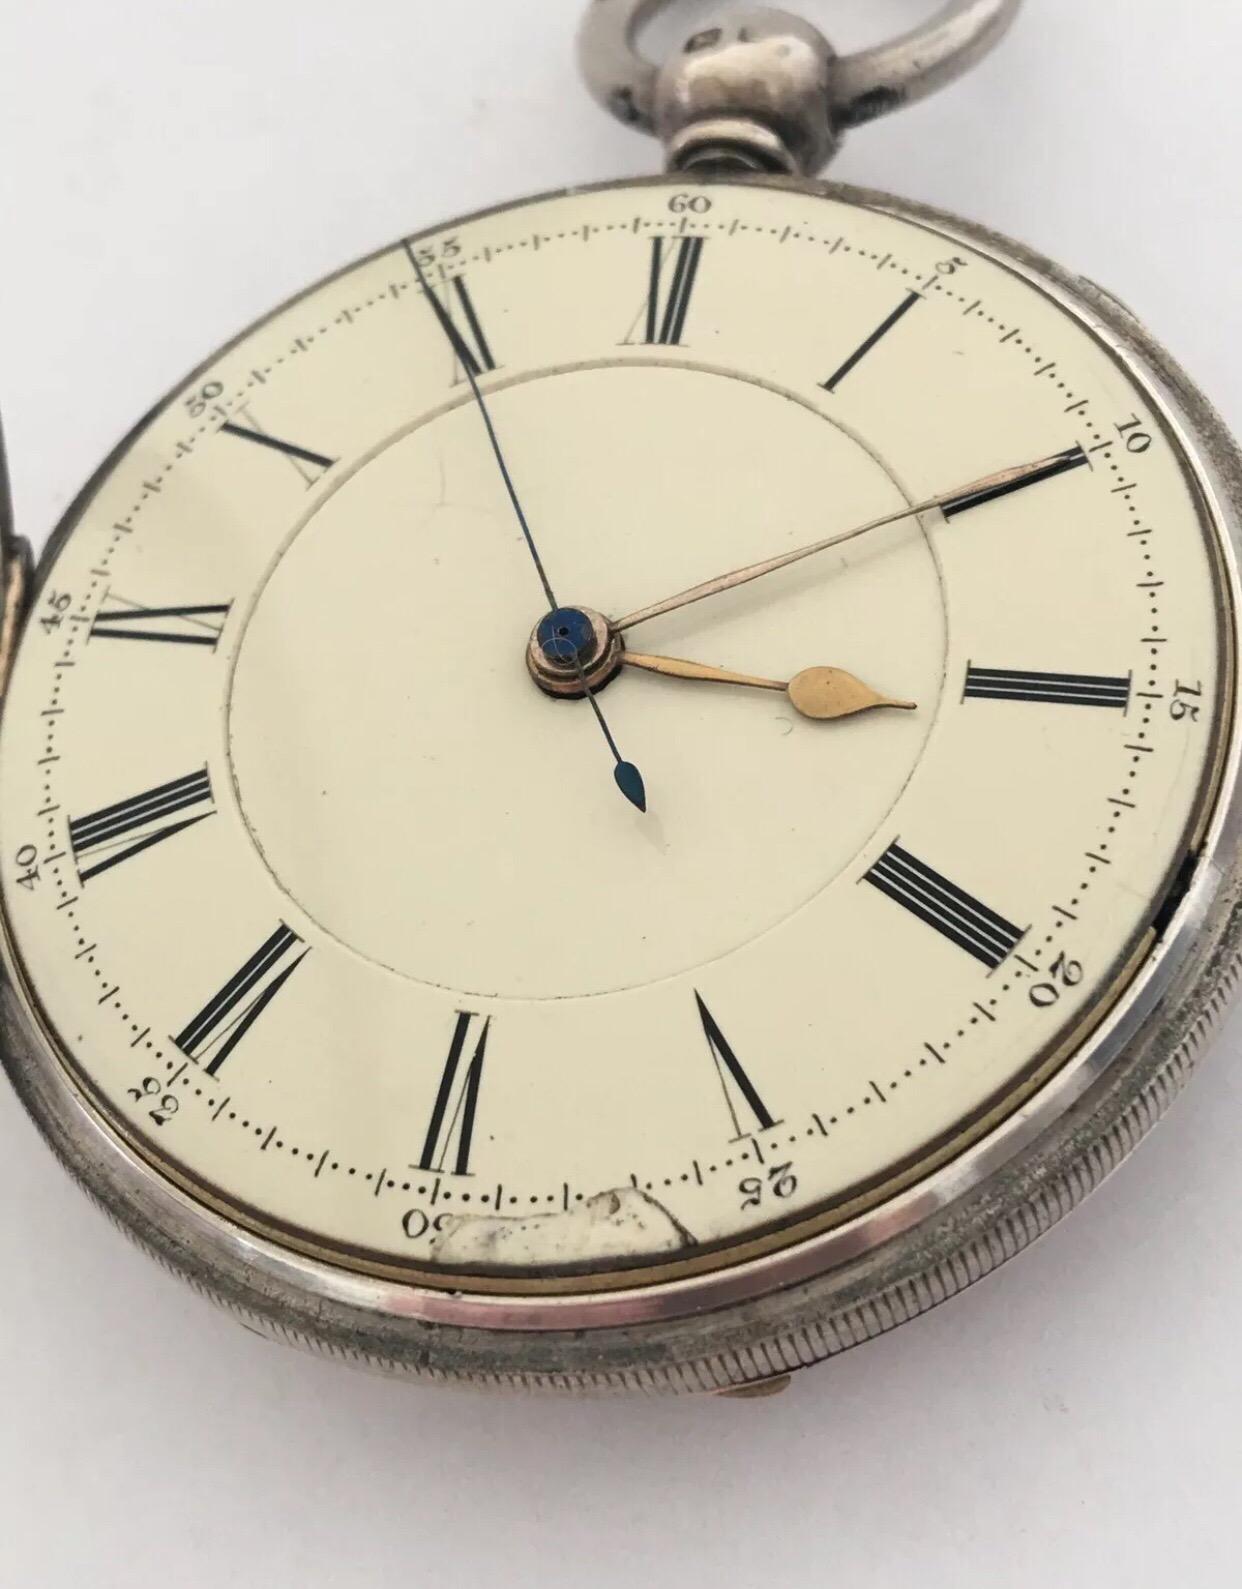 Early & Rare English Lever Centre Seconds Chronograph Silver Pocket Watch For Sale 4